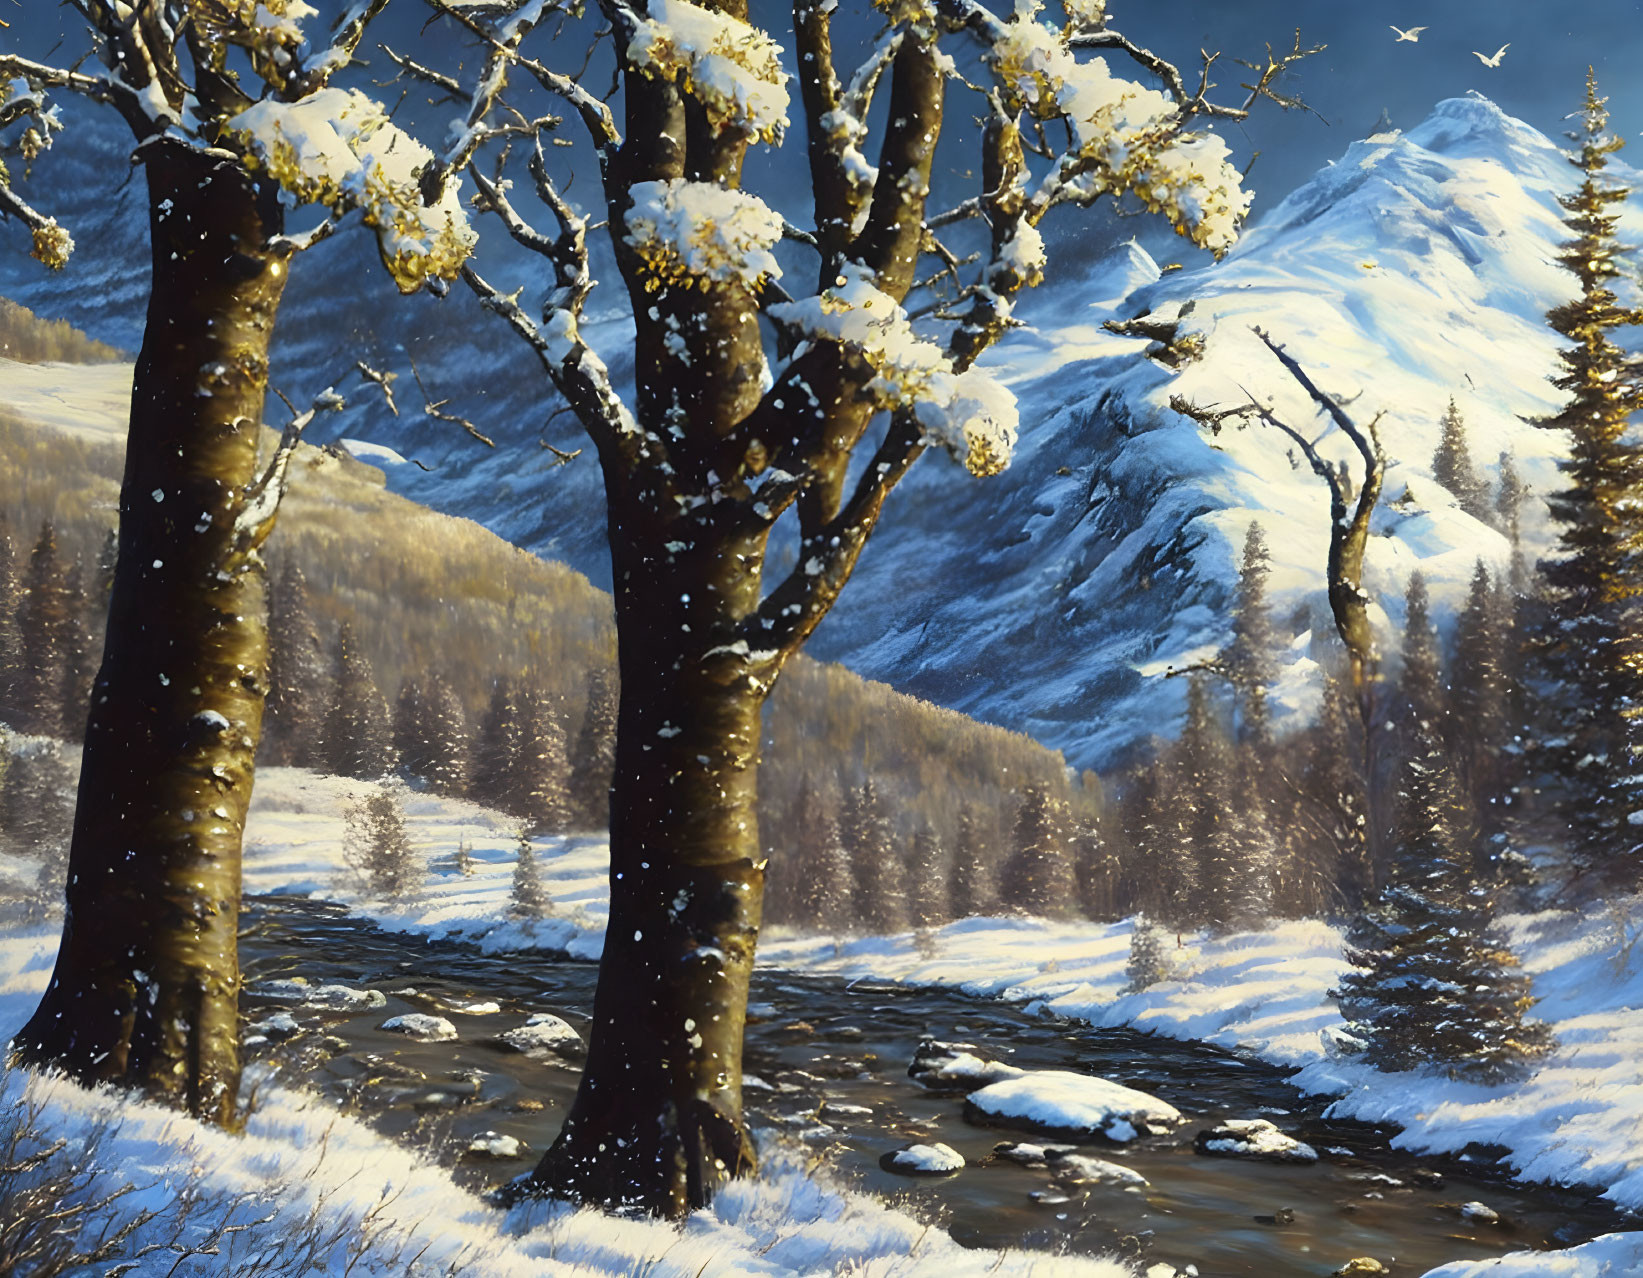 Snow-covered trees, flowing river, mountains, clear sky: Serene winter landscape